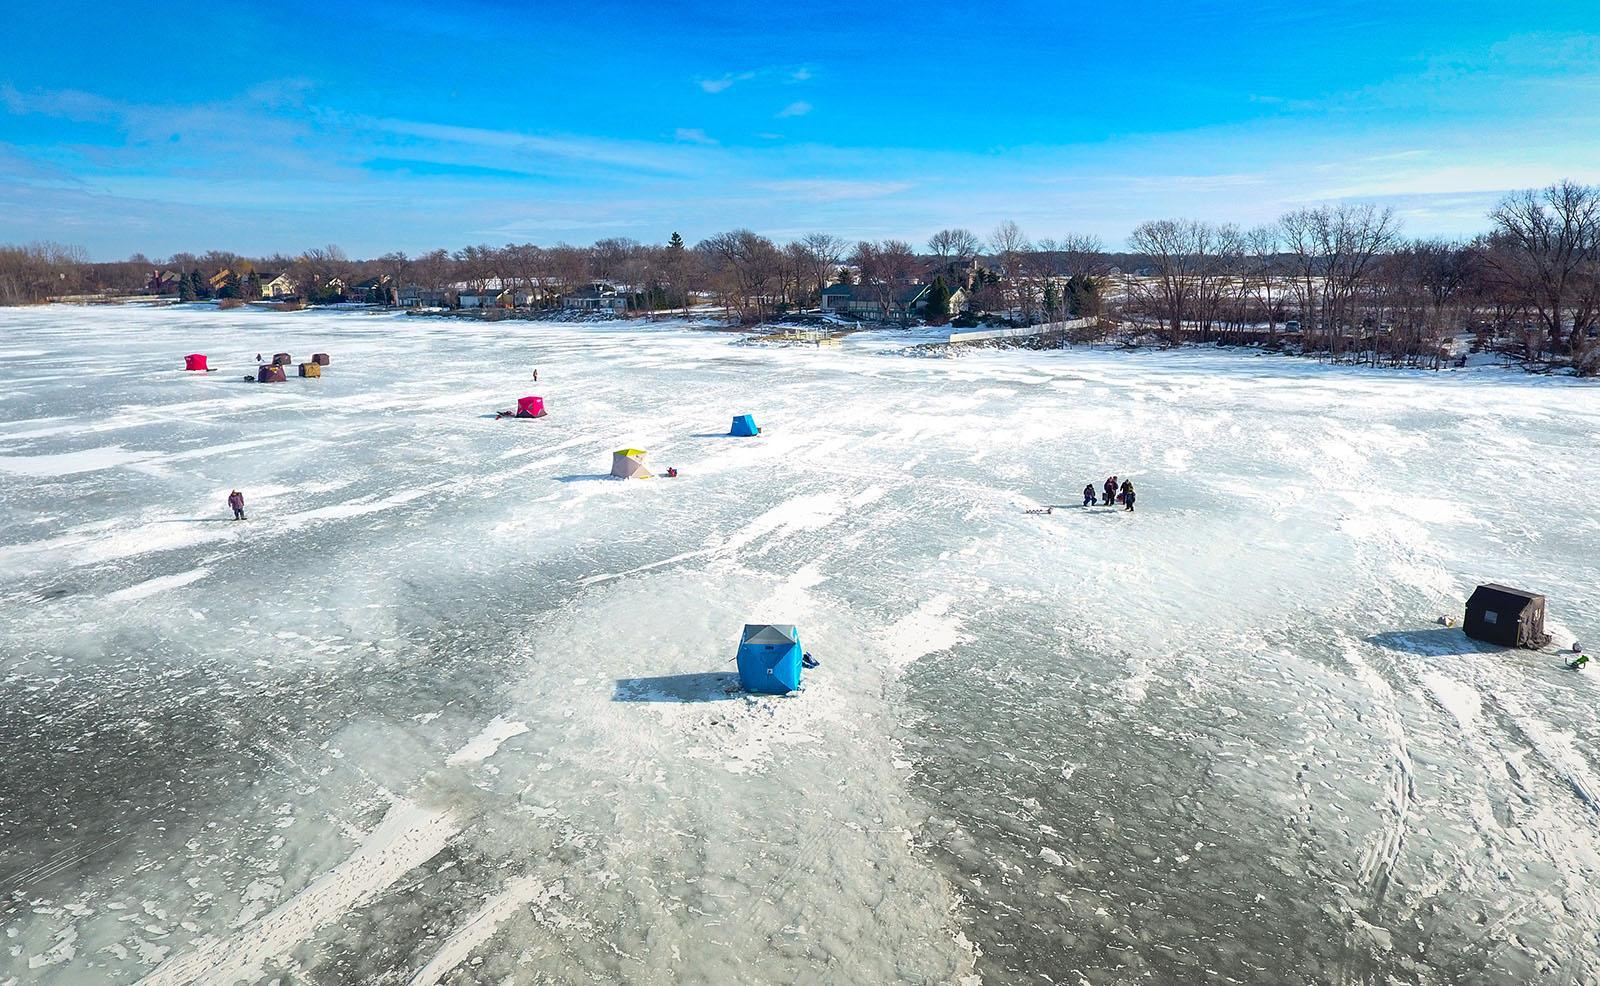 Ice shanties spread atop the iced over lake